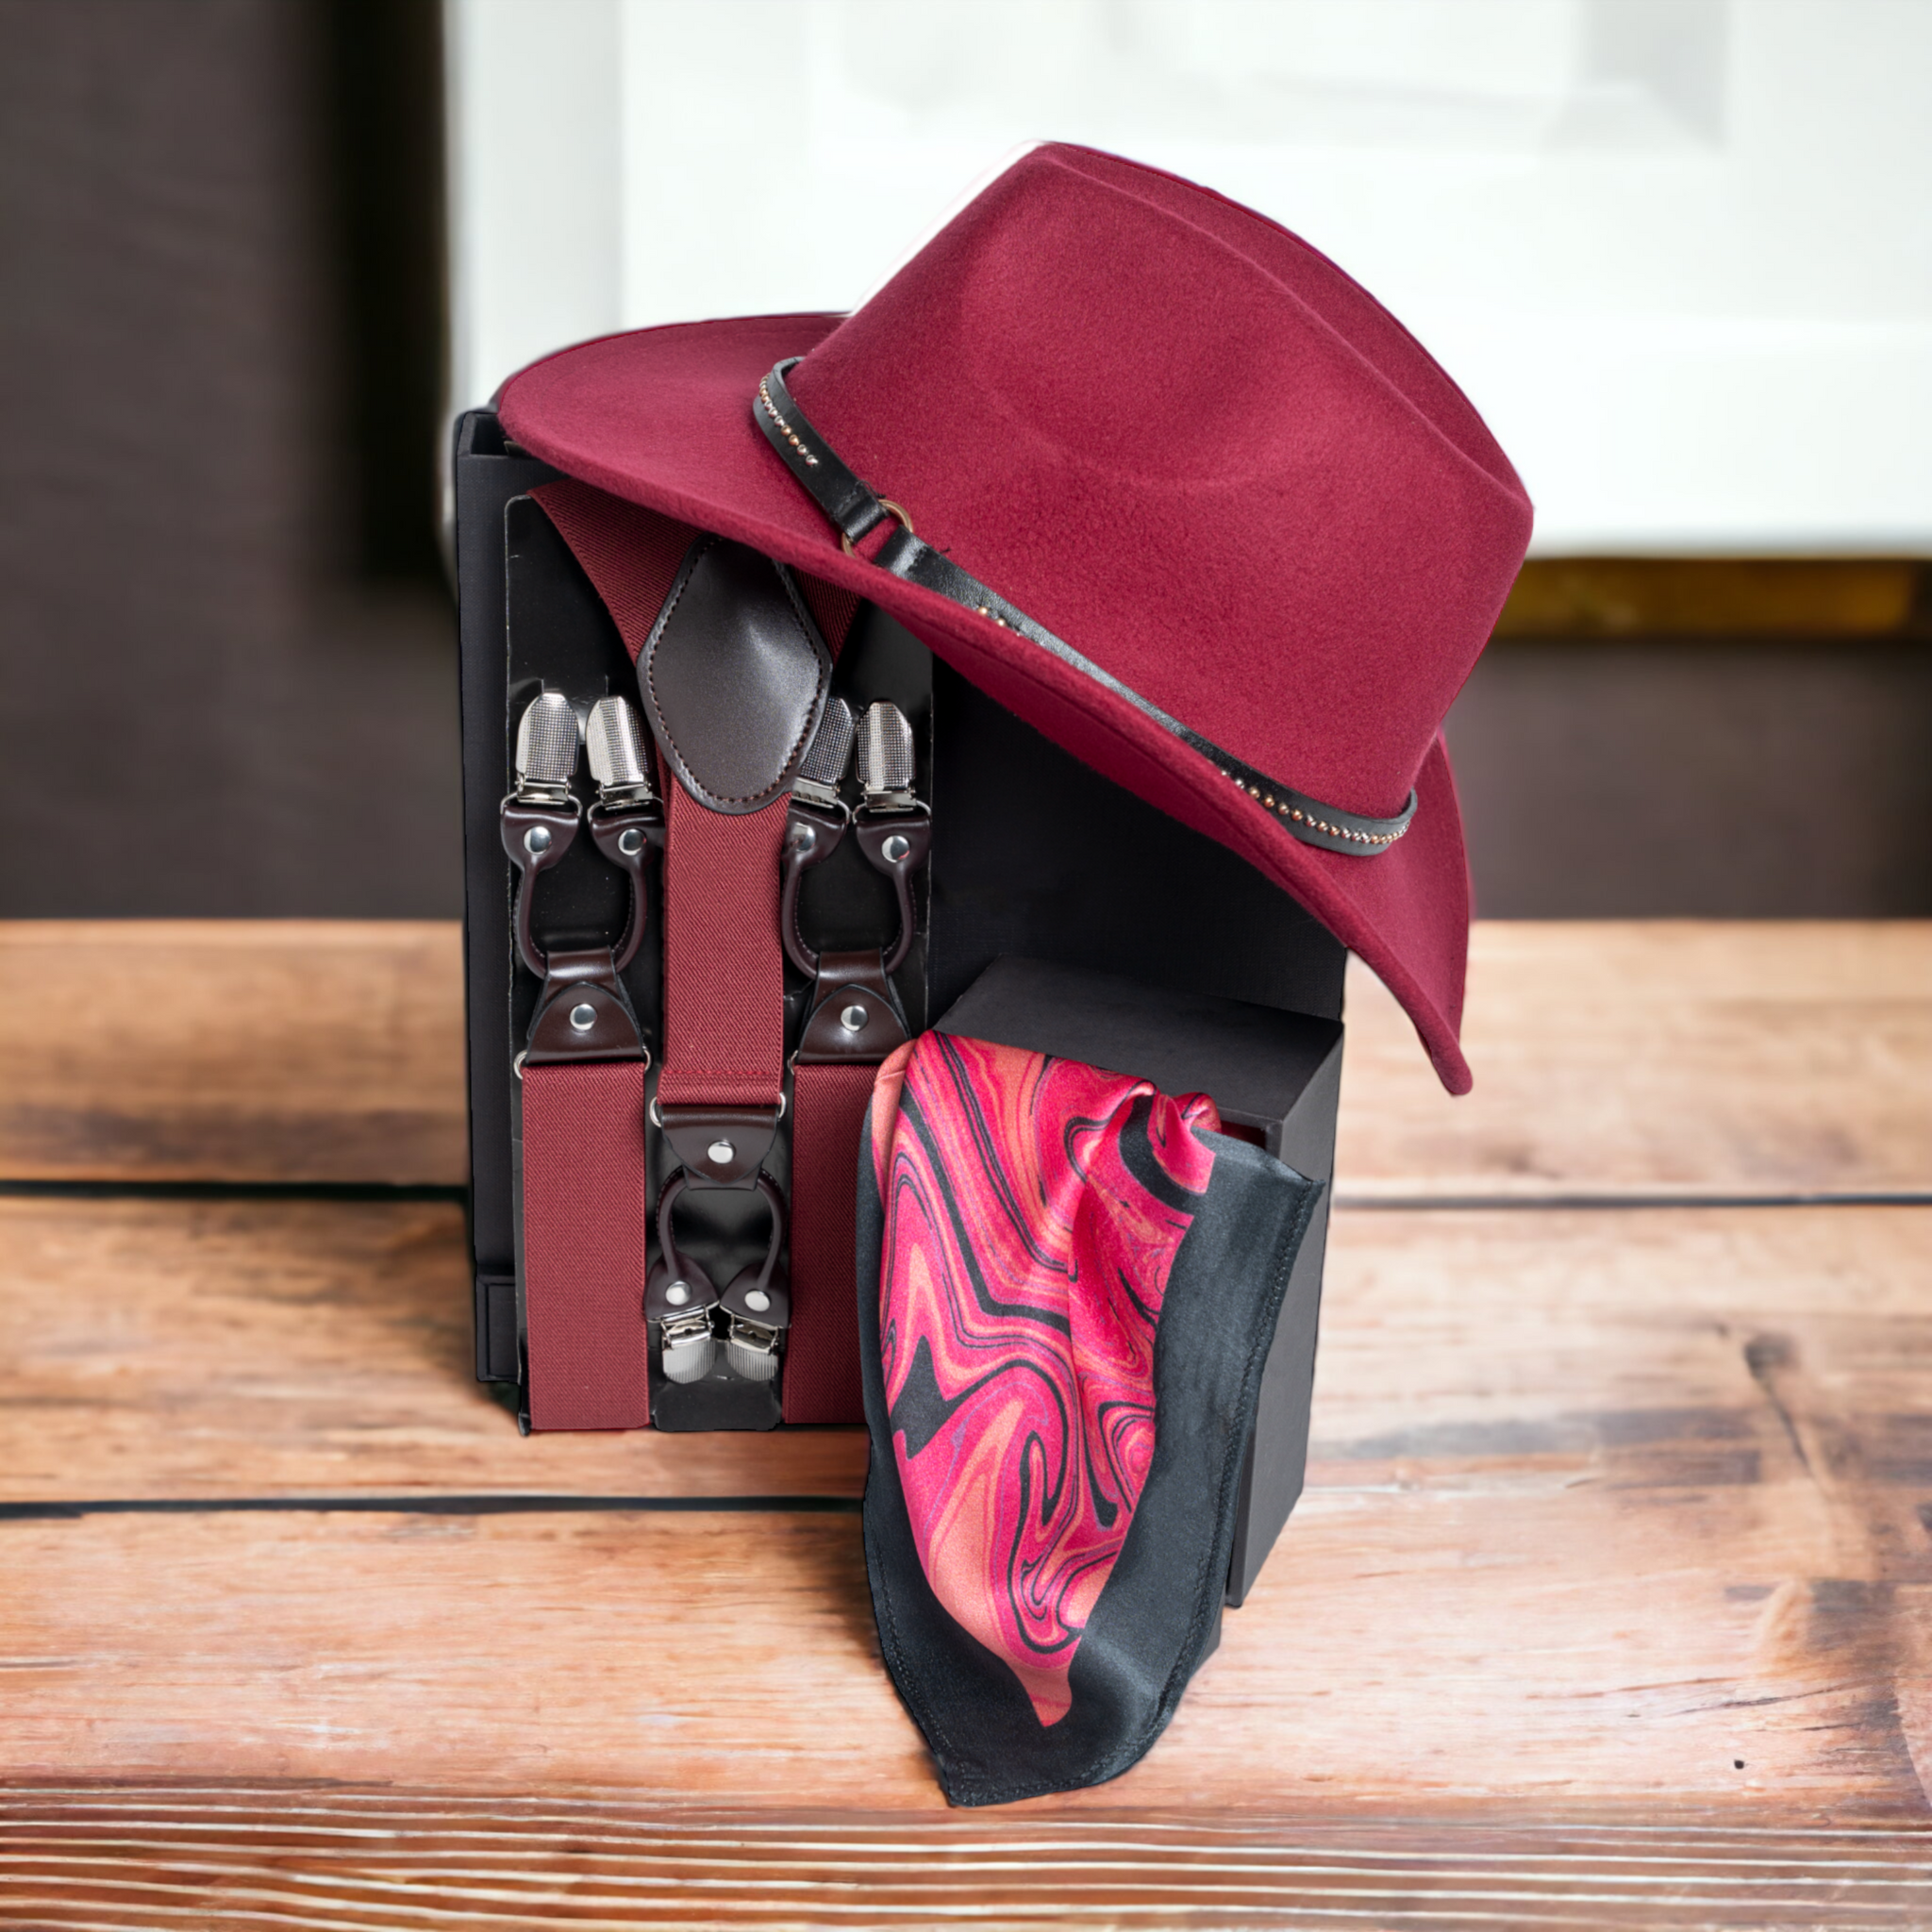 Chokore Special 3-in-1 Gift Set for Him (Burgundy Suspenders, Cowboy Hat, & Pocket Square)